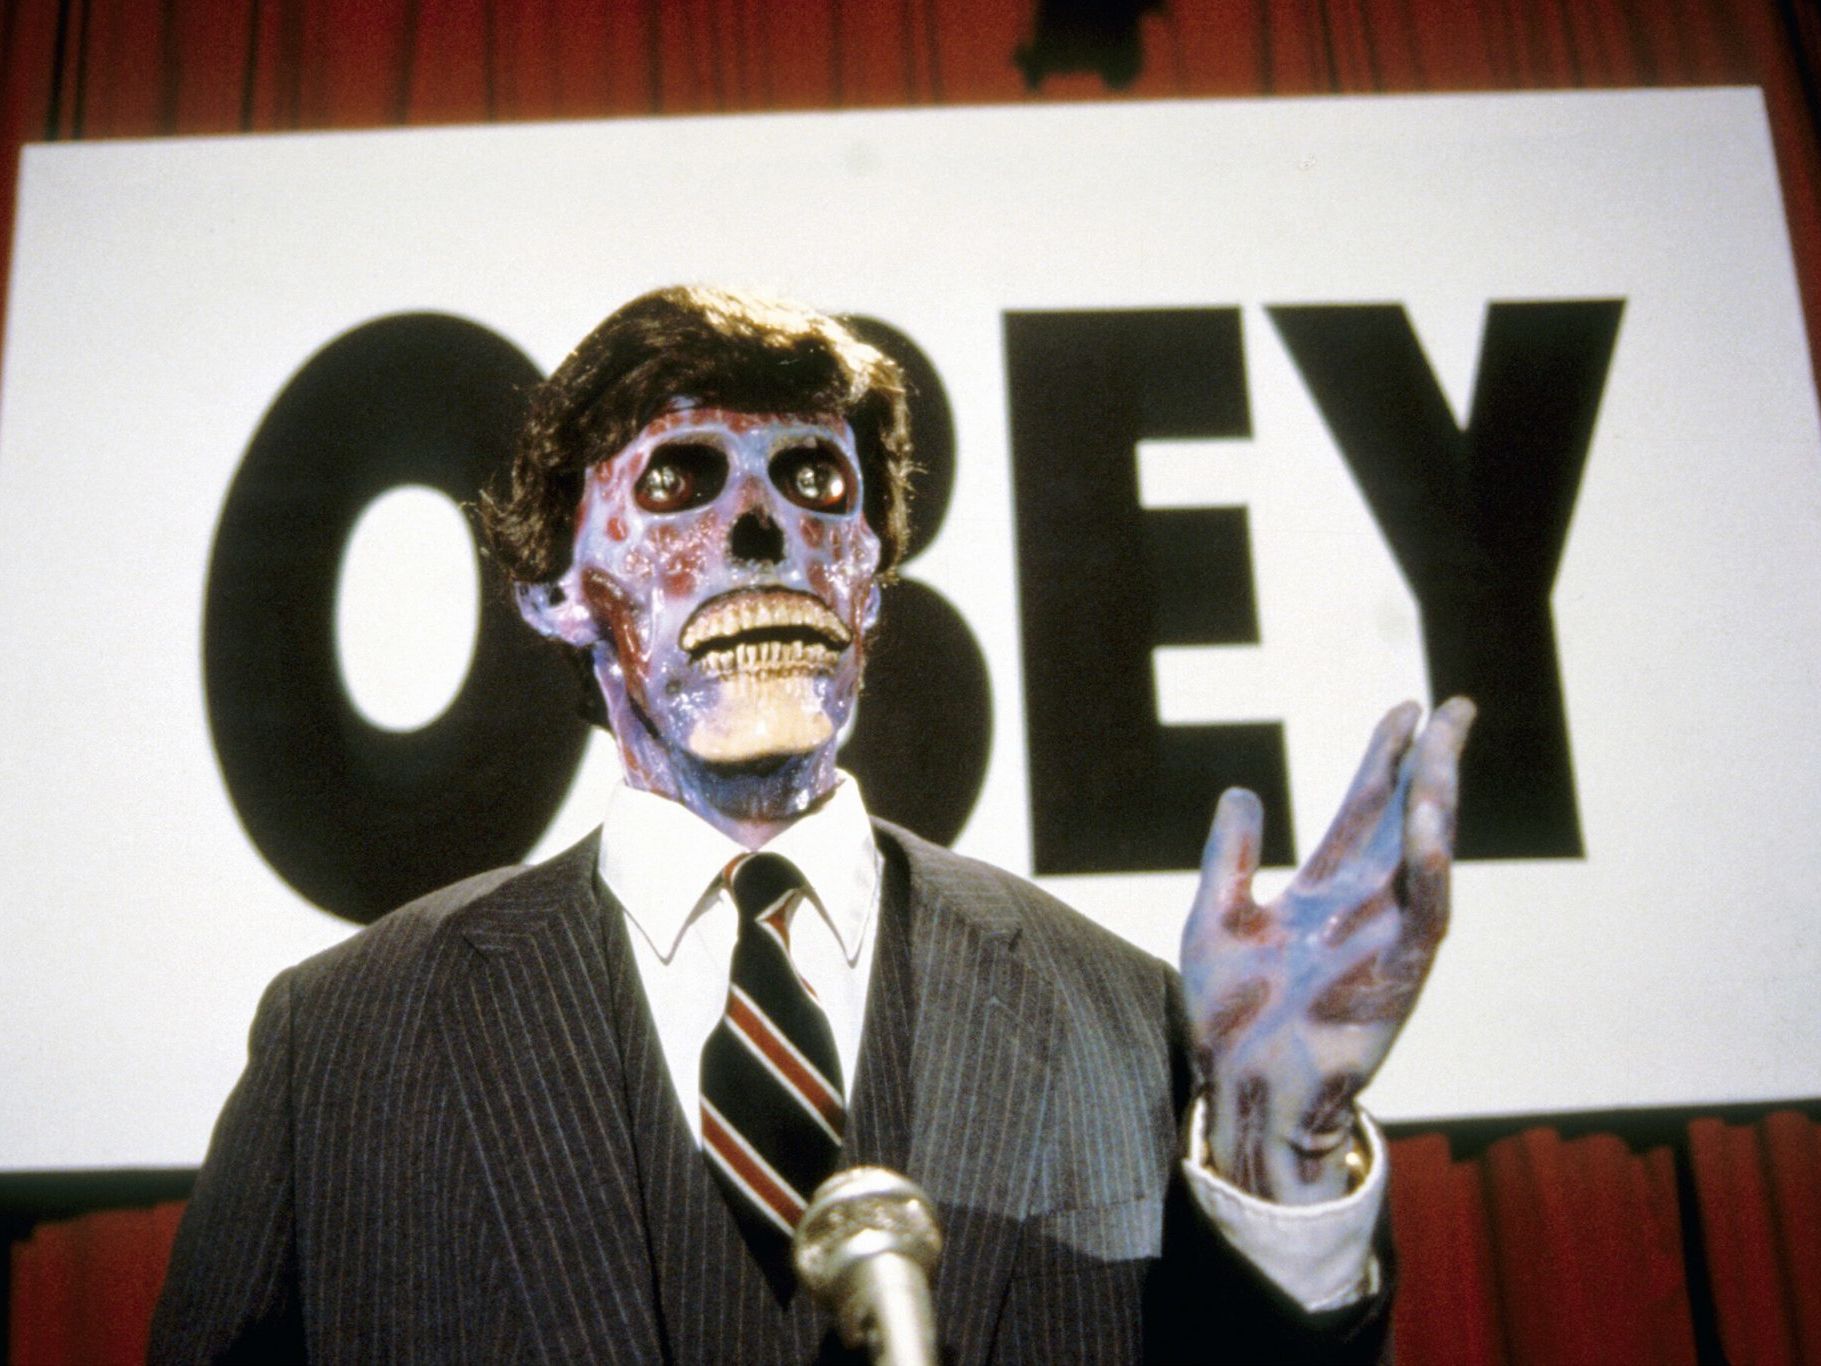 Skeleton in a suit next to sign that reads 'OBEY' 